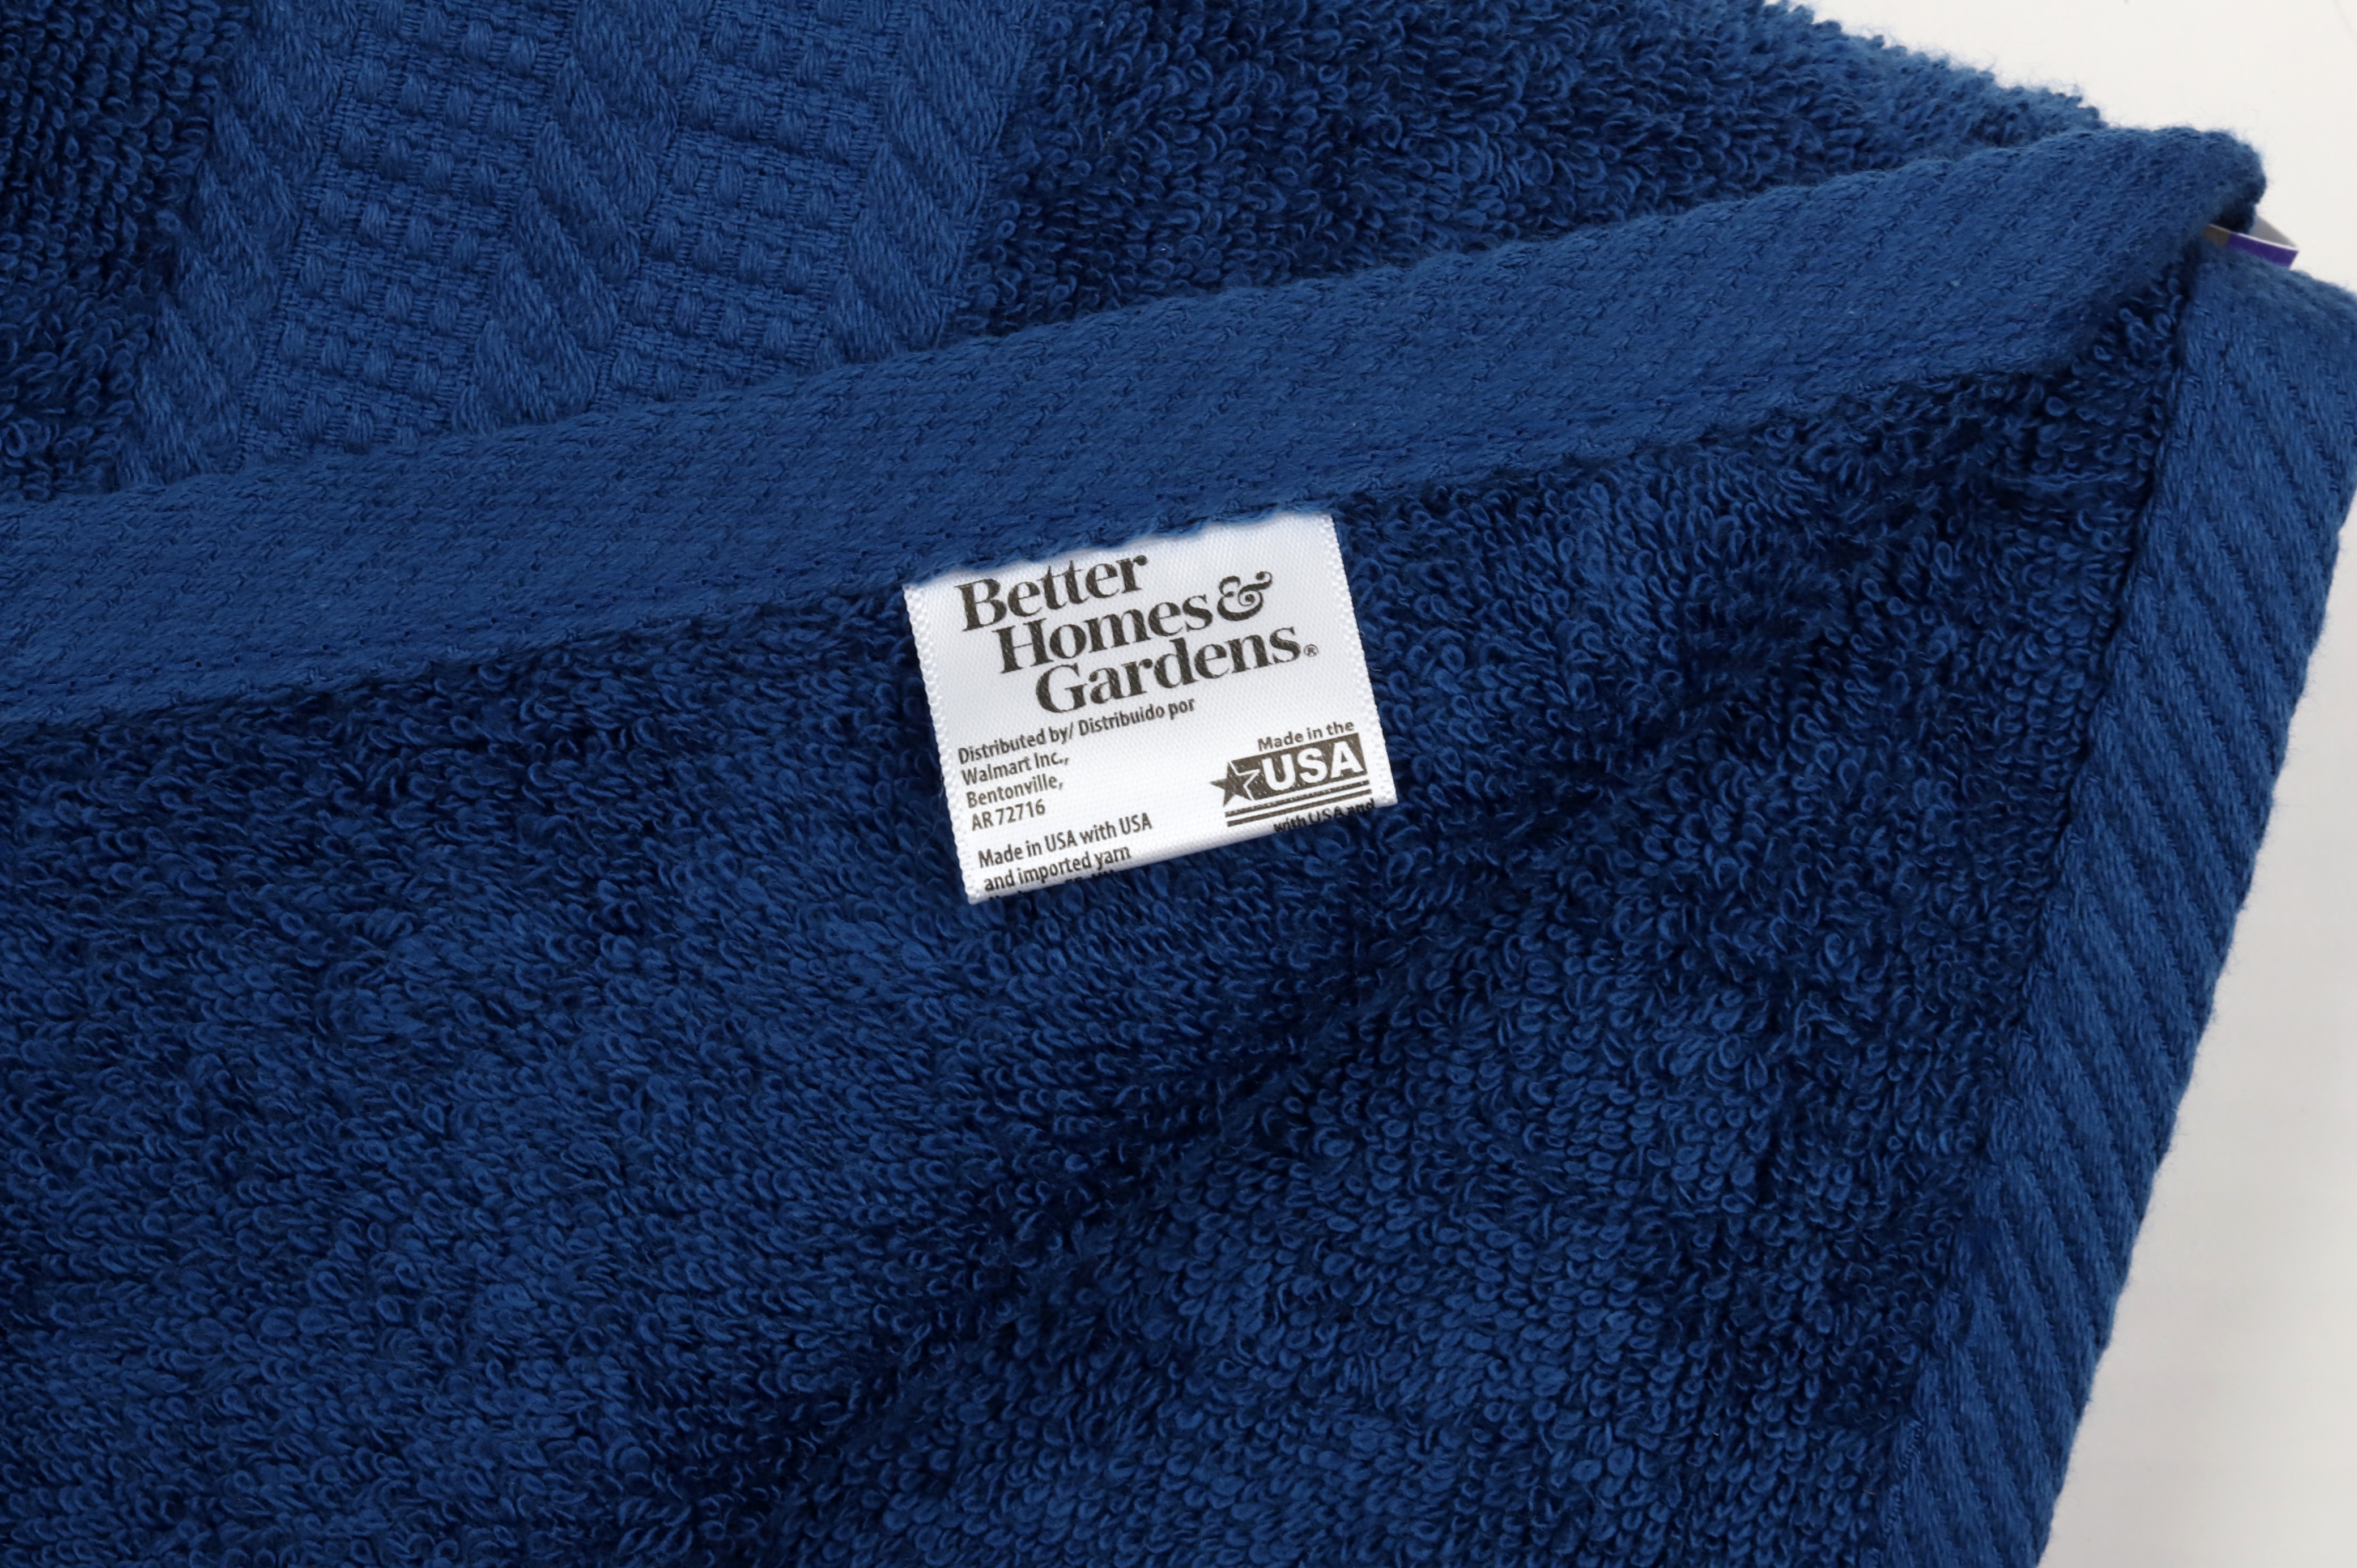 Better Homes & Gardens Adult Bath Towel, Solid Blue - image 3 of 7